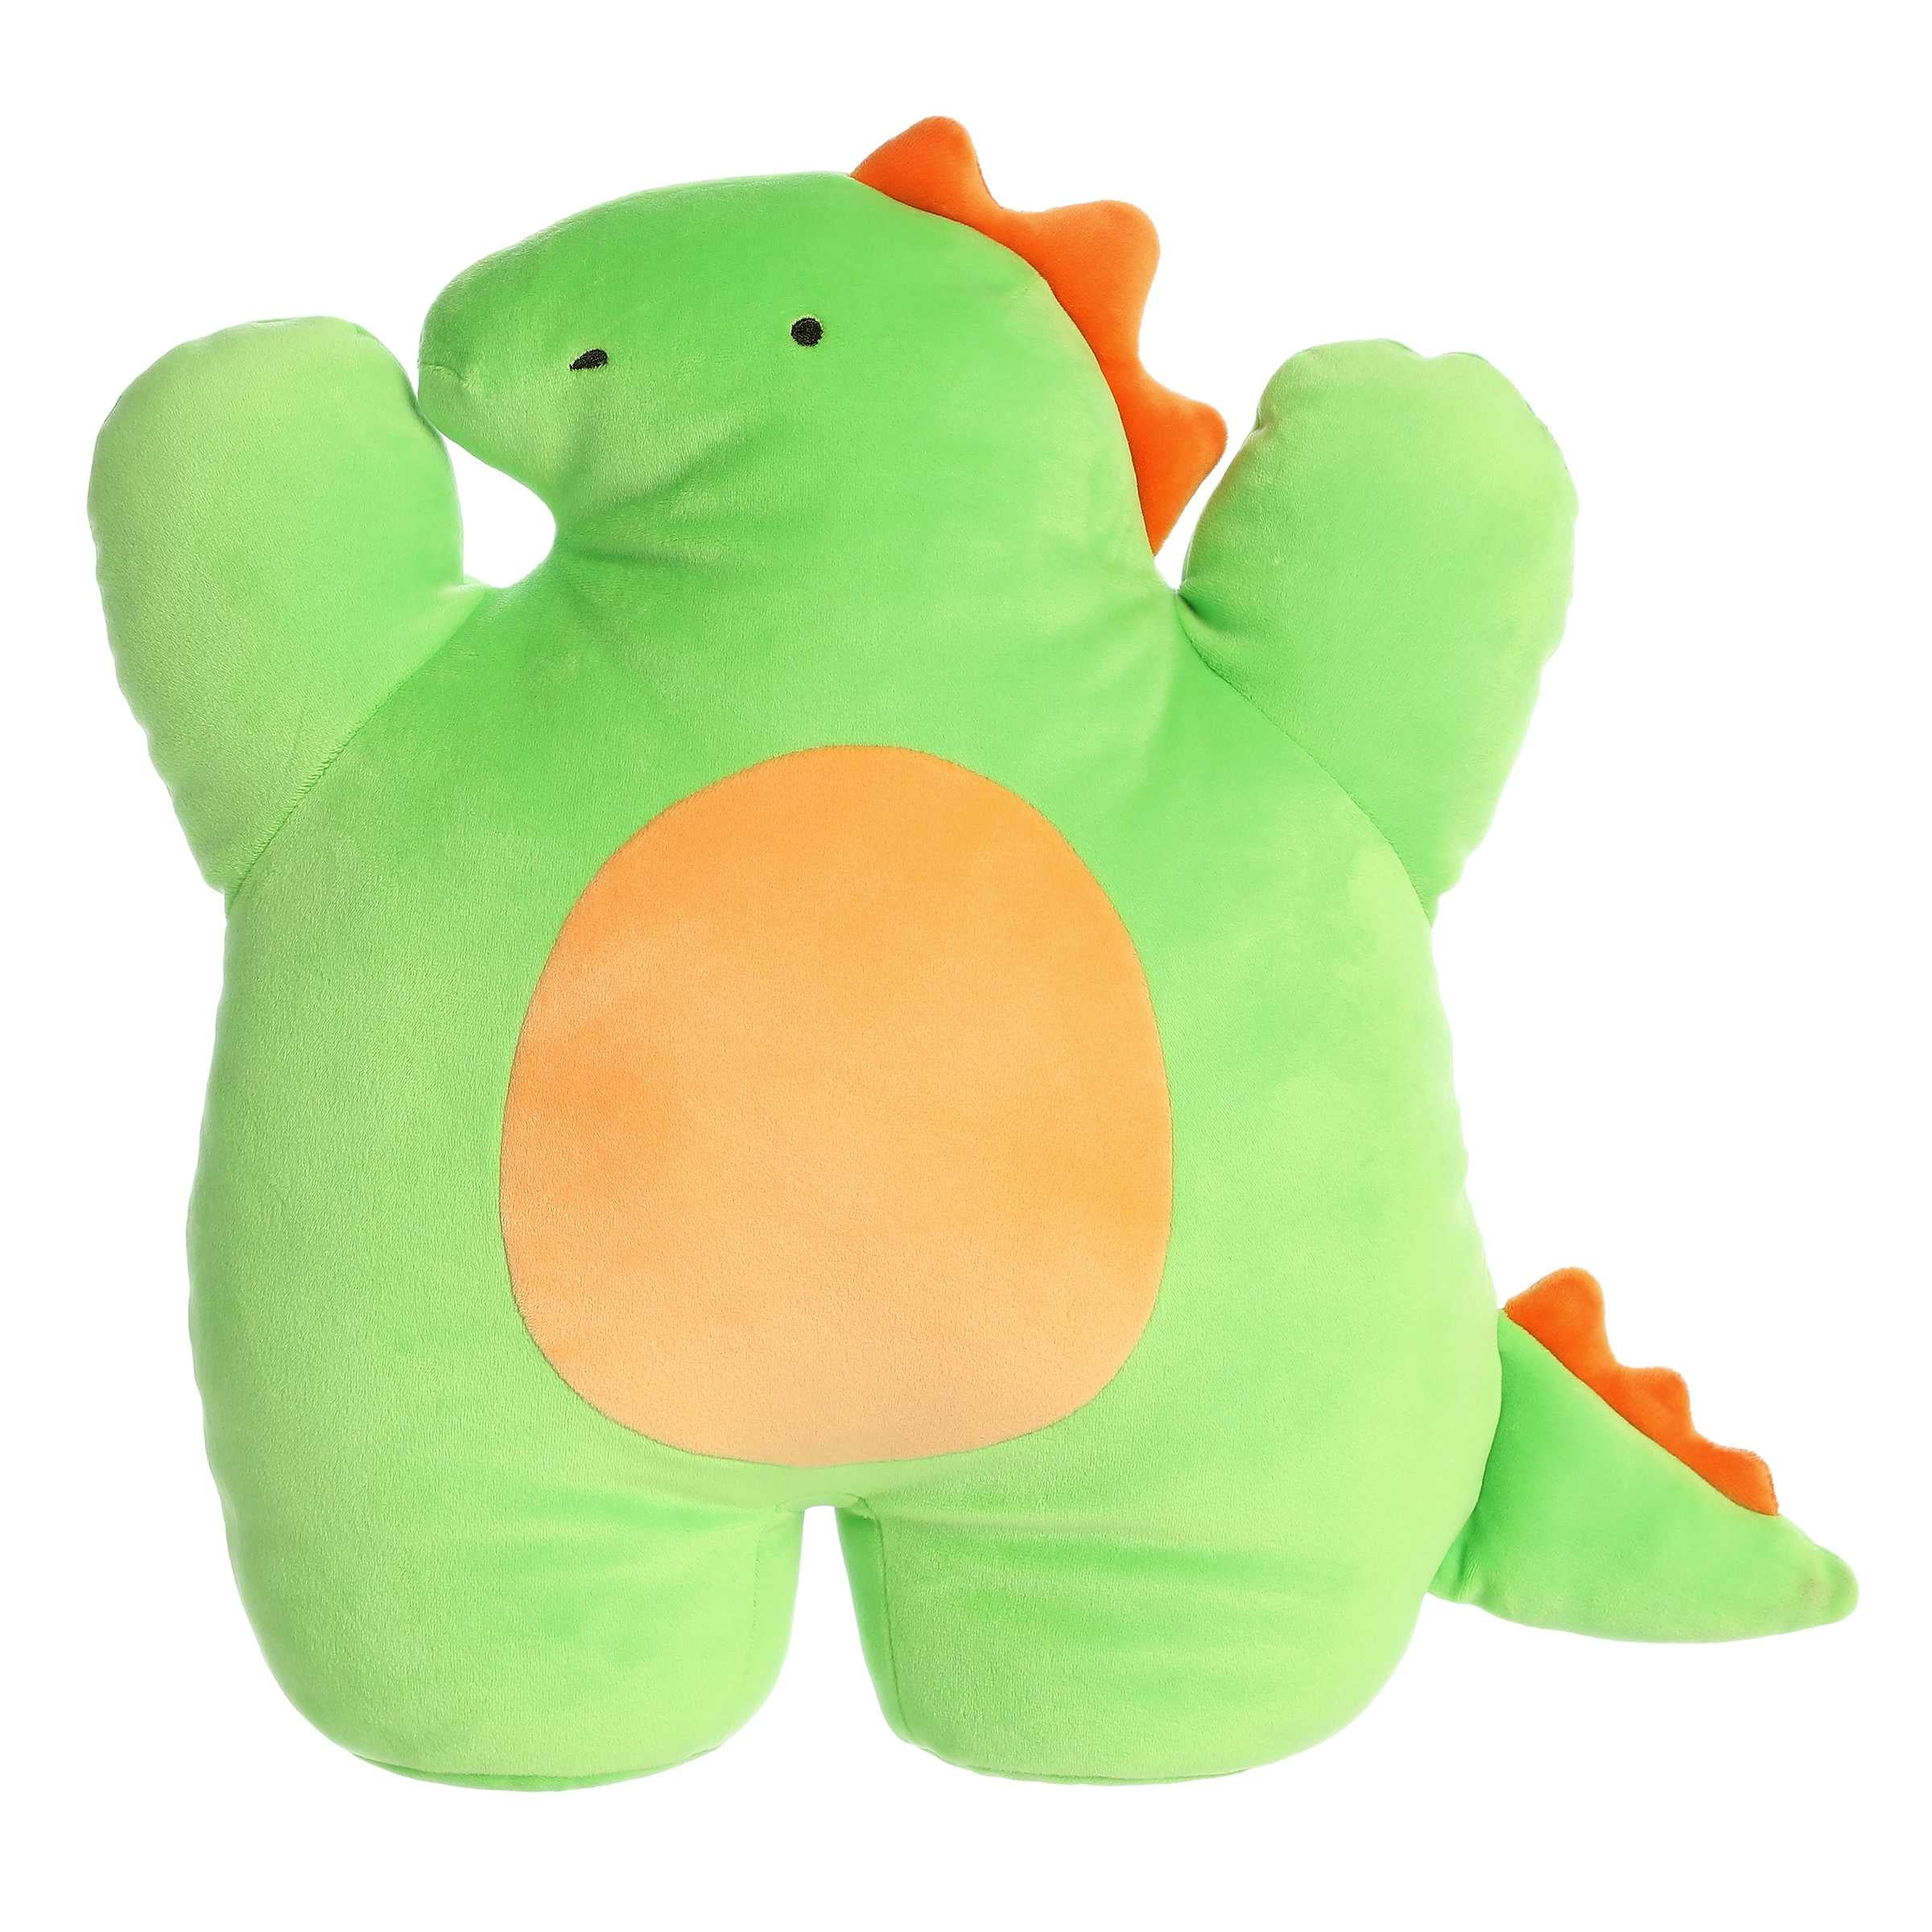 Cuddly soft dino plush toy with green body, orange pointed scales on its head, orange center design, and black eyes and nose.